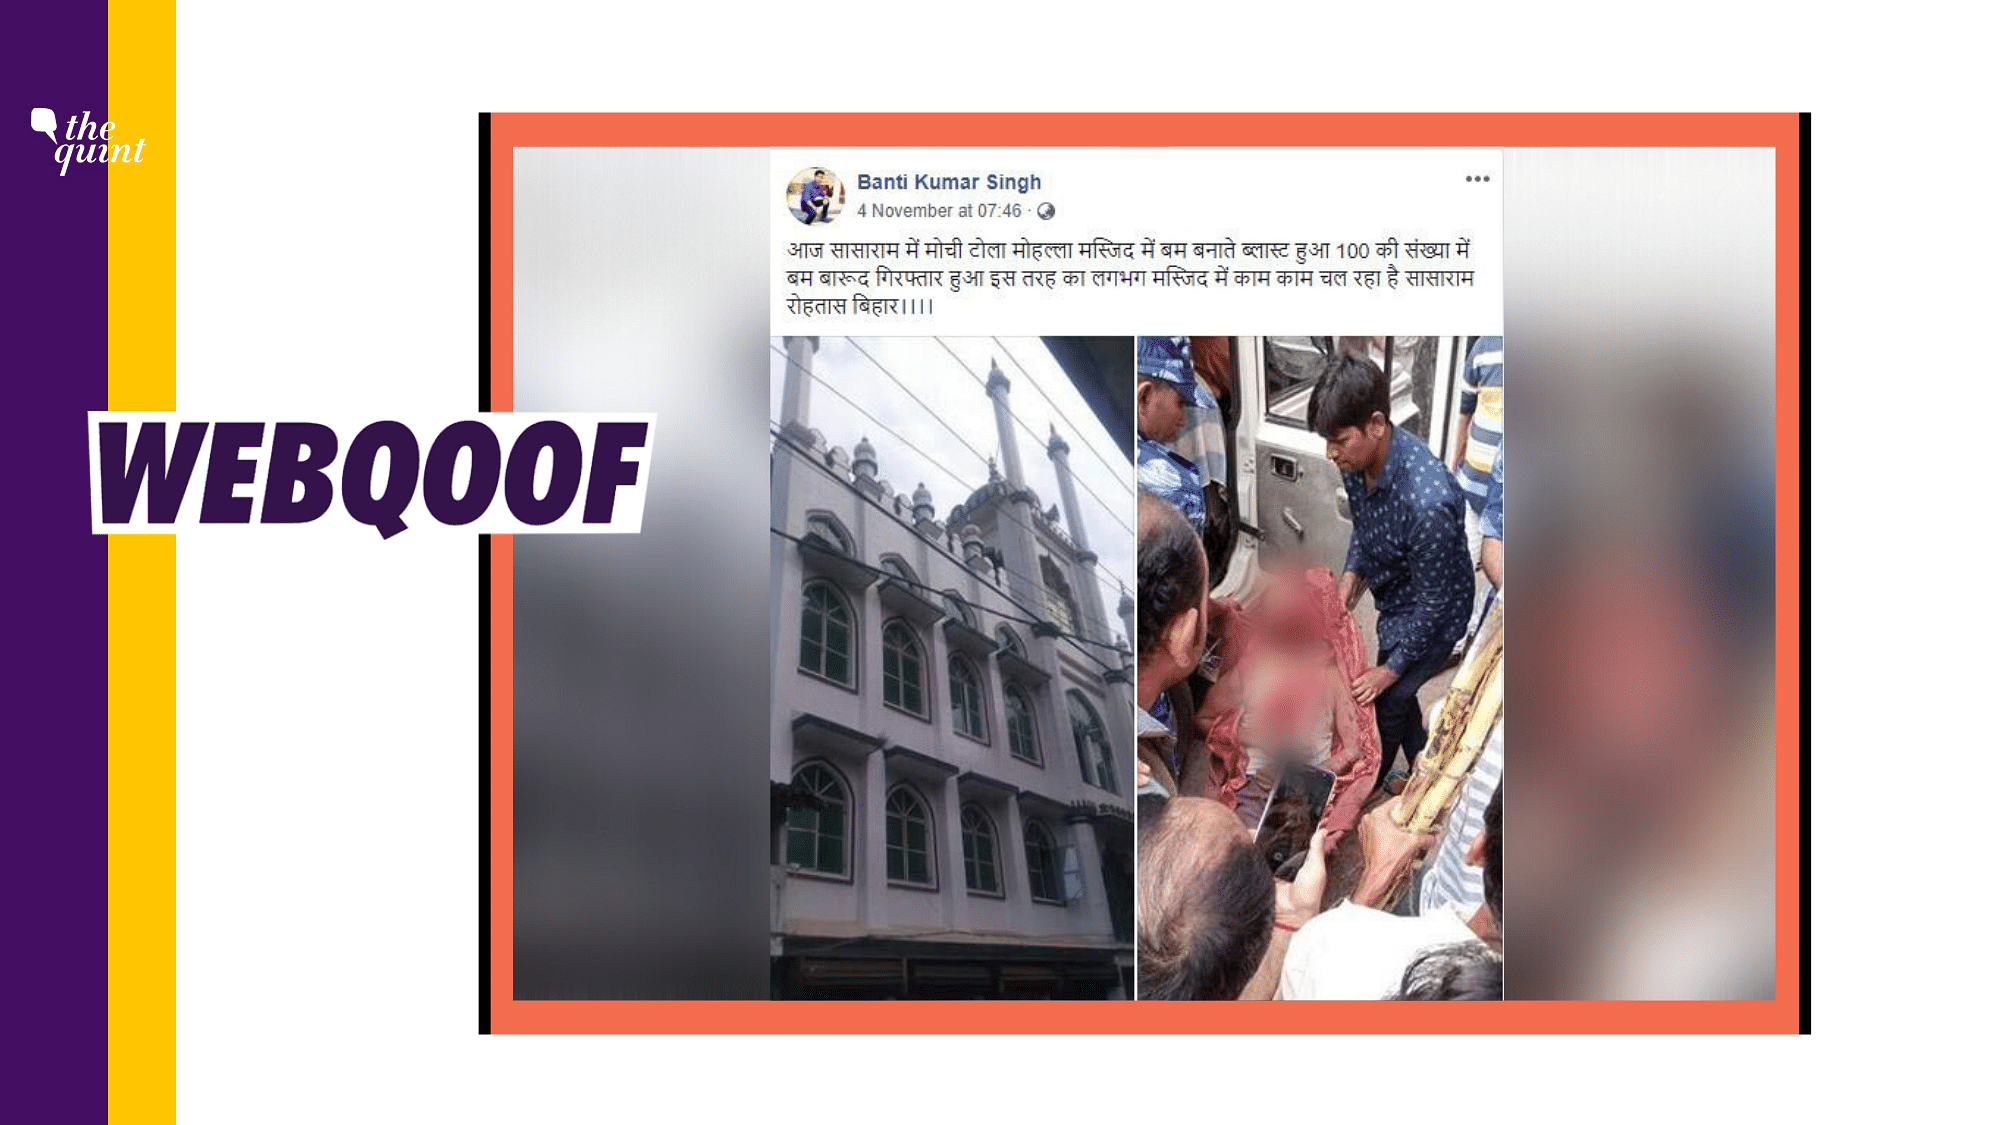 A viral message on social media claims that after a blast in a mosque in Bihar, 100 bombs were recovered from the spot.